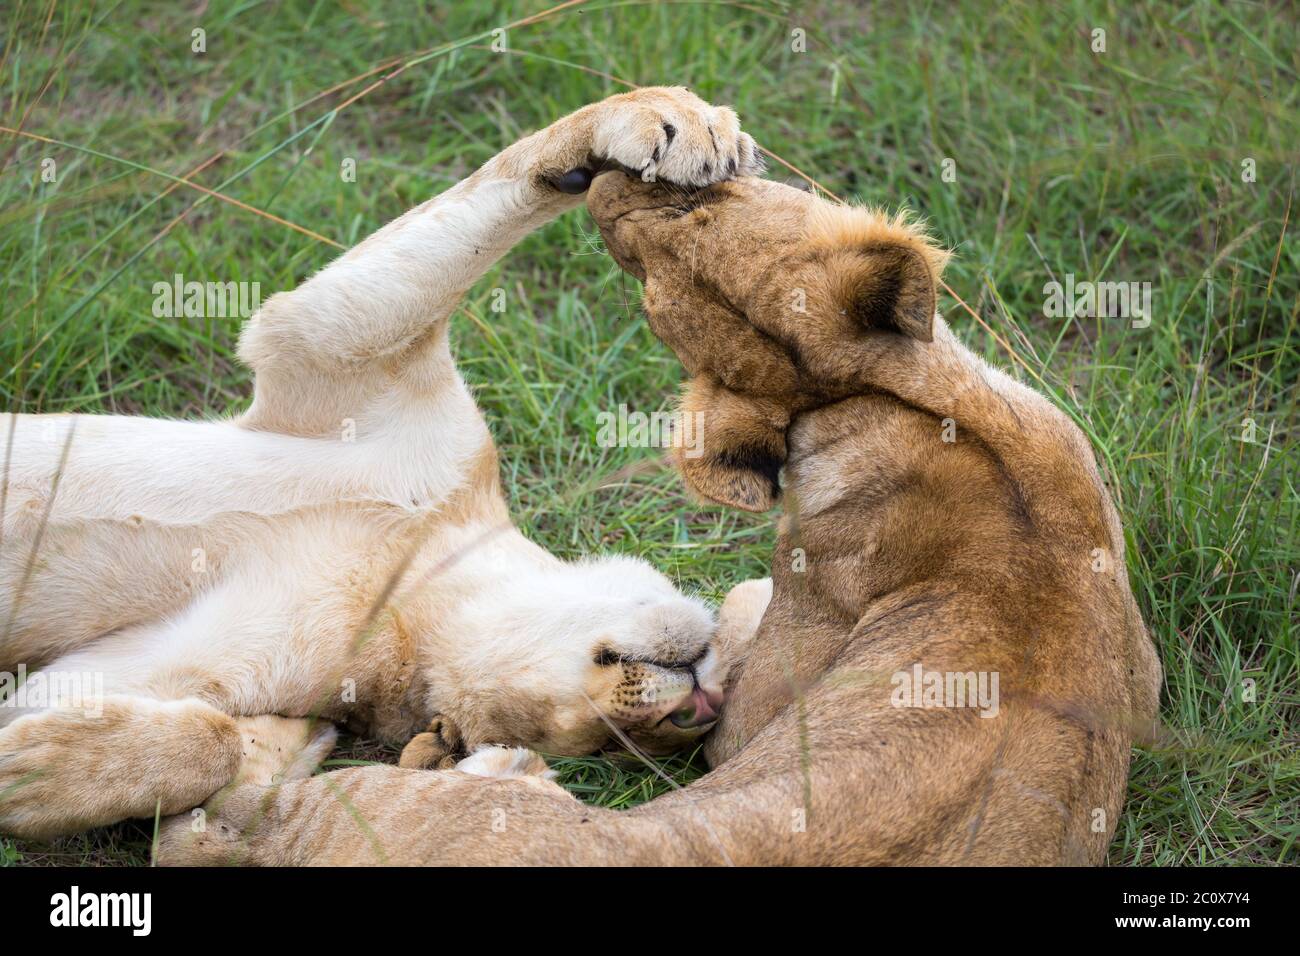 The young lions are playing together in the grass Stock Photo